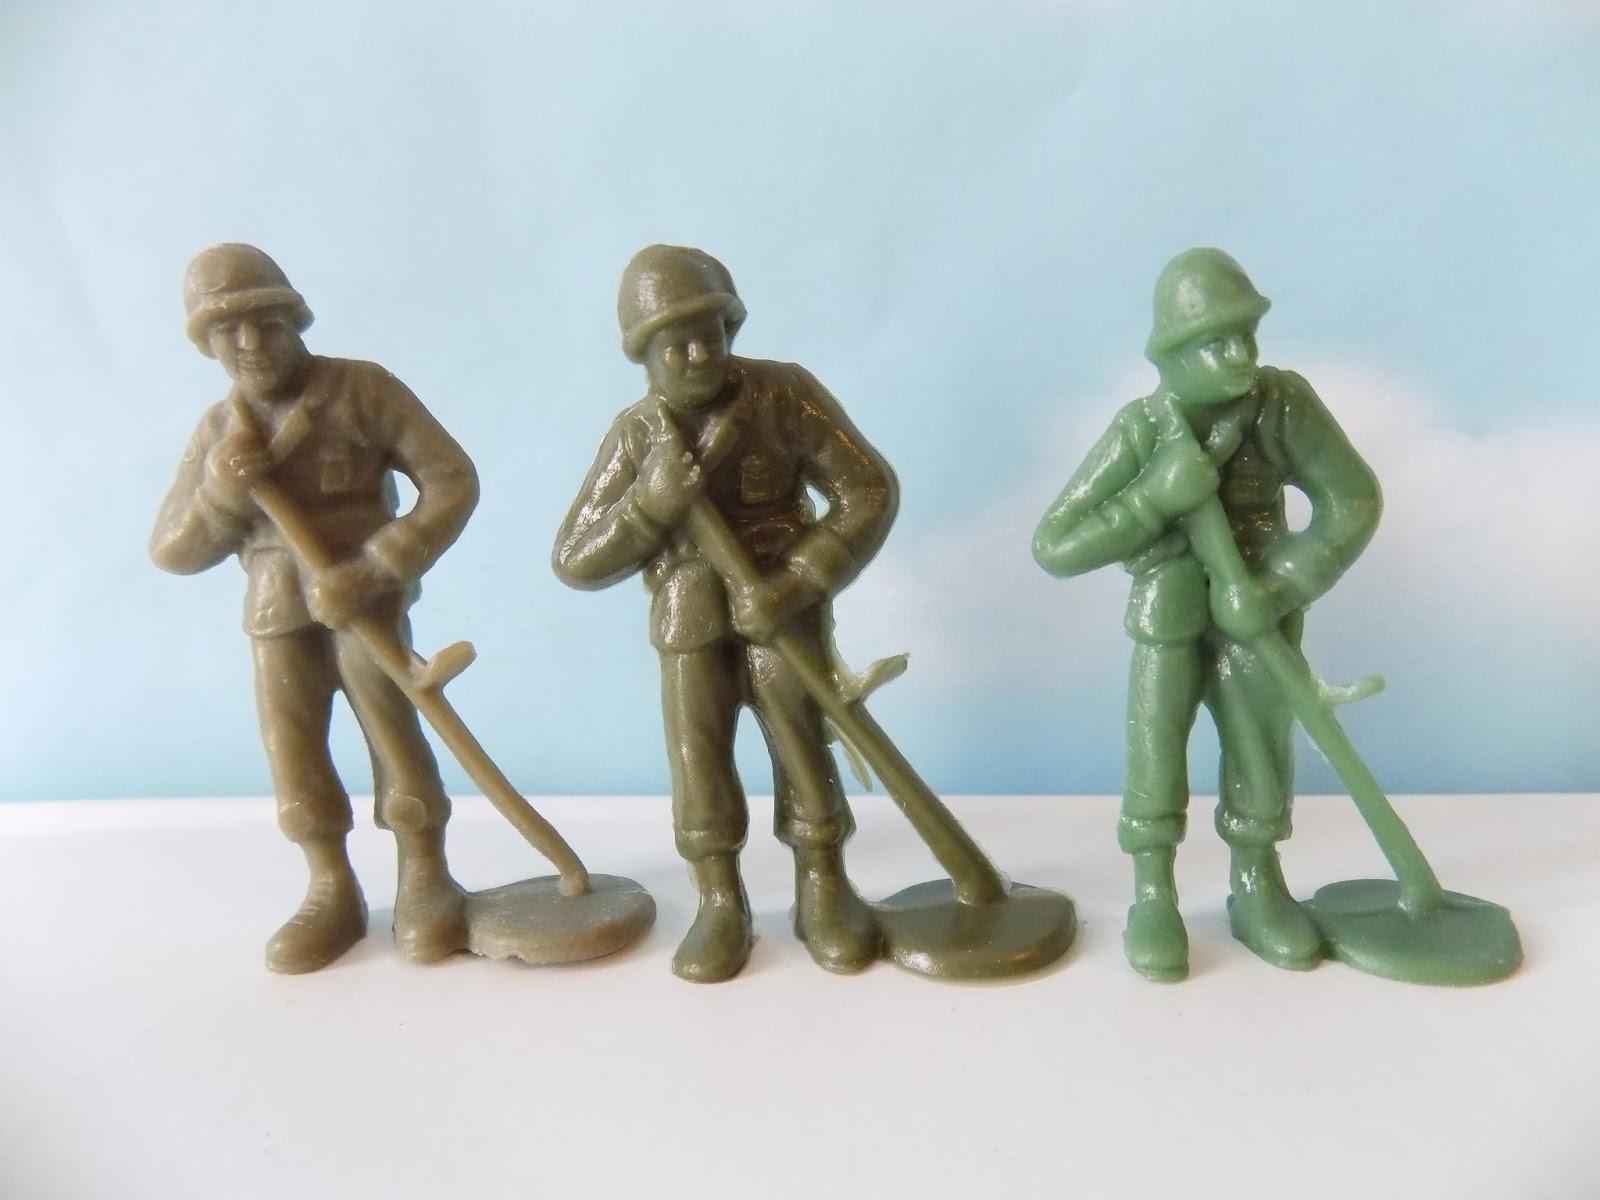 60mm Tim-Mee Air Force Crew with Hose